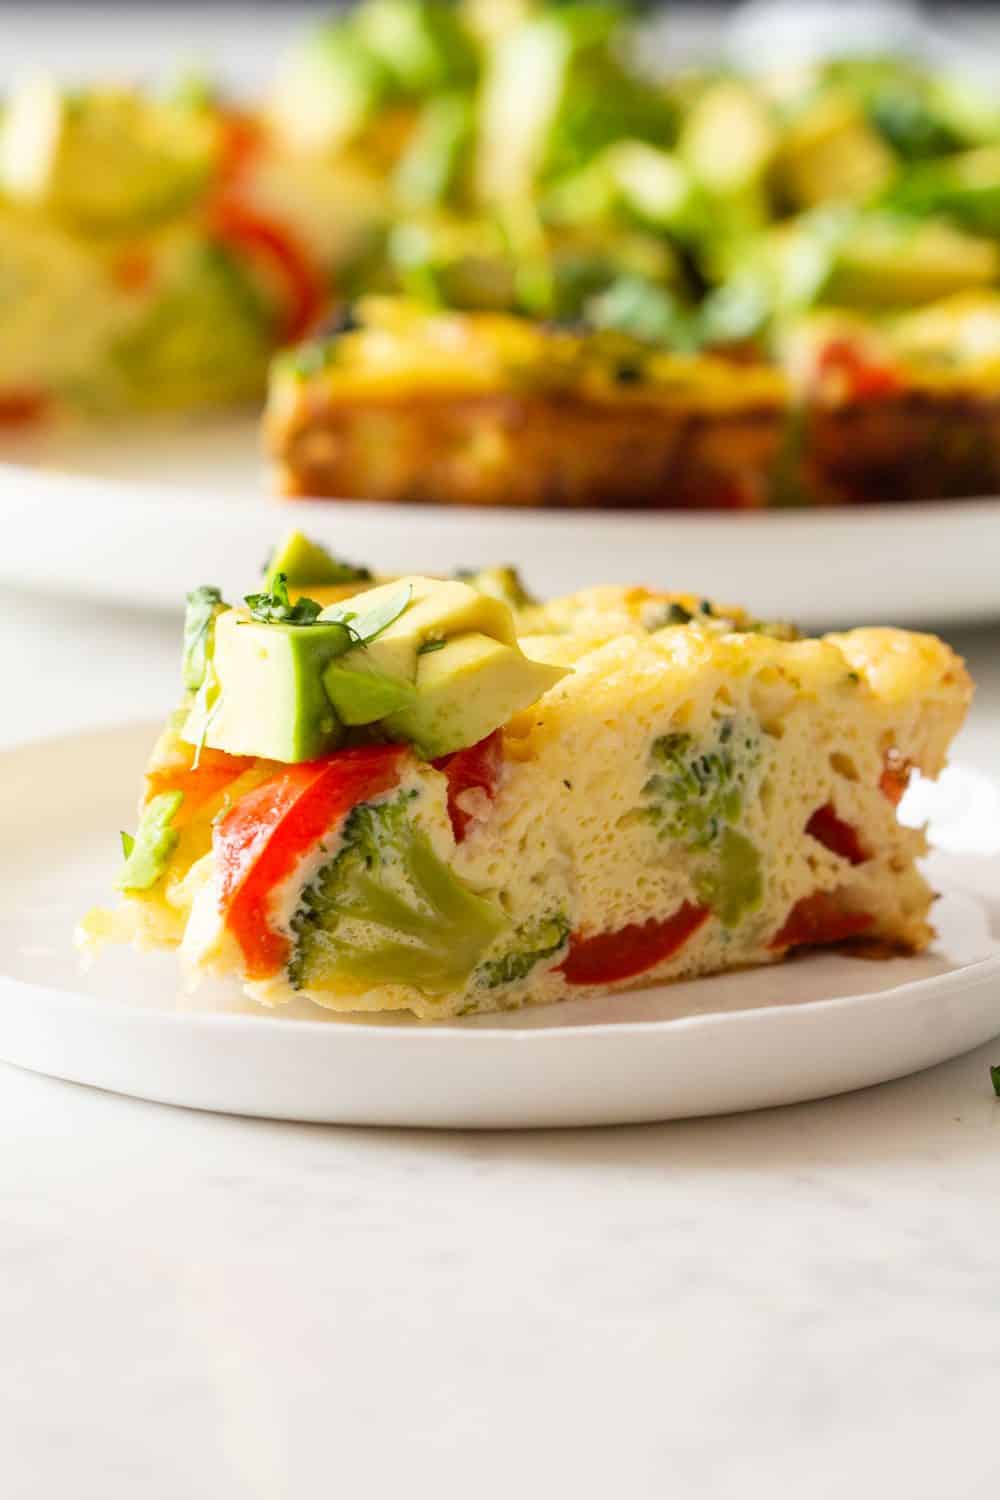 Slice of vegetable frittata on a plate showing inside texture.